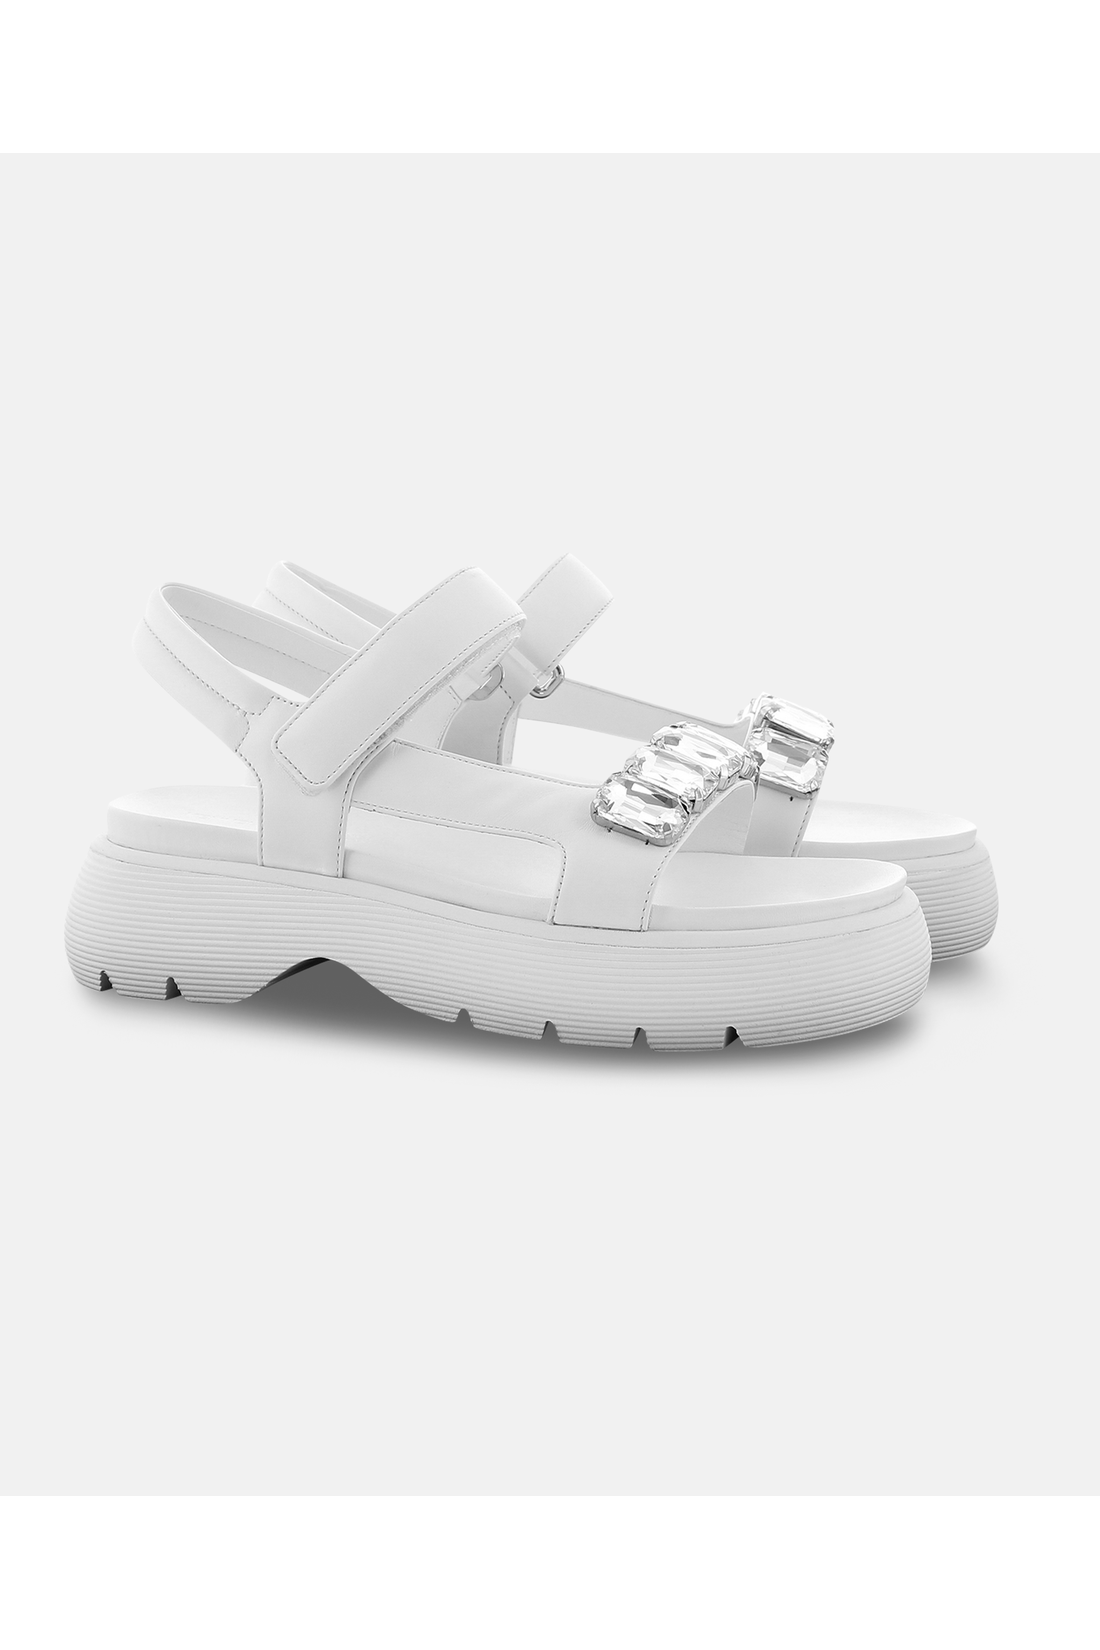 Kennel-Schmenger-OUTLET-SALE-GO-Sandalen-2_5-35-Weiss-ARCHIVE-COLLECTION.png